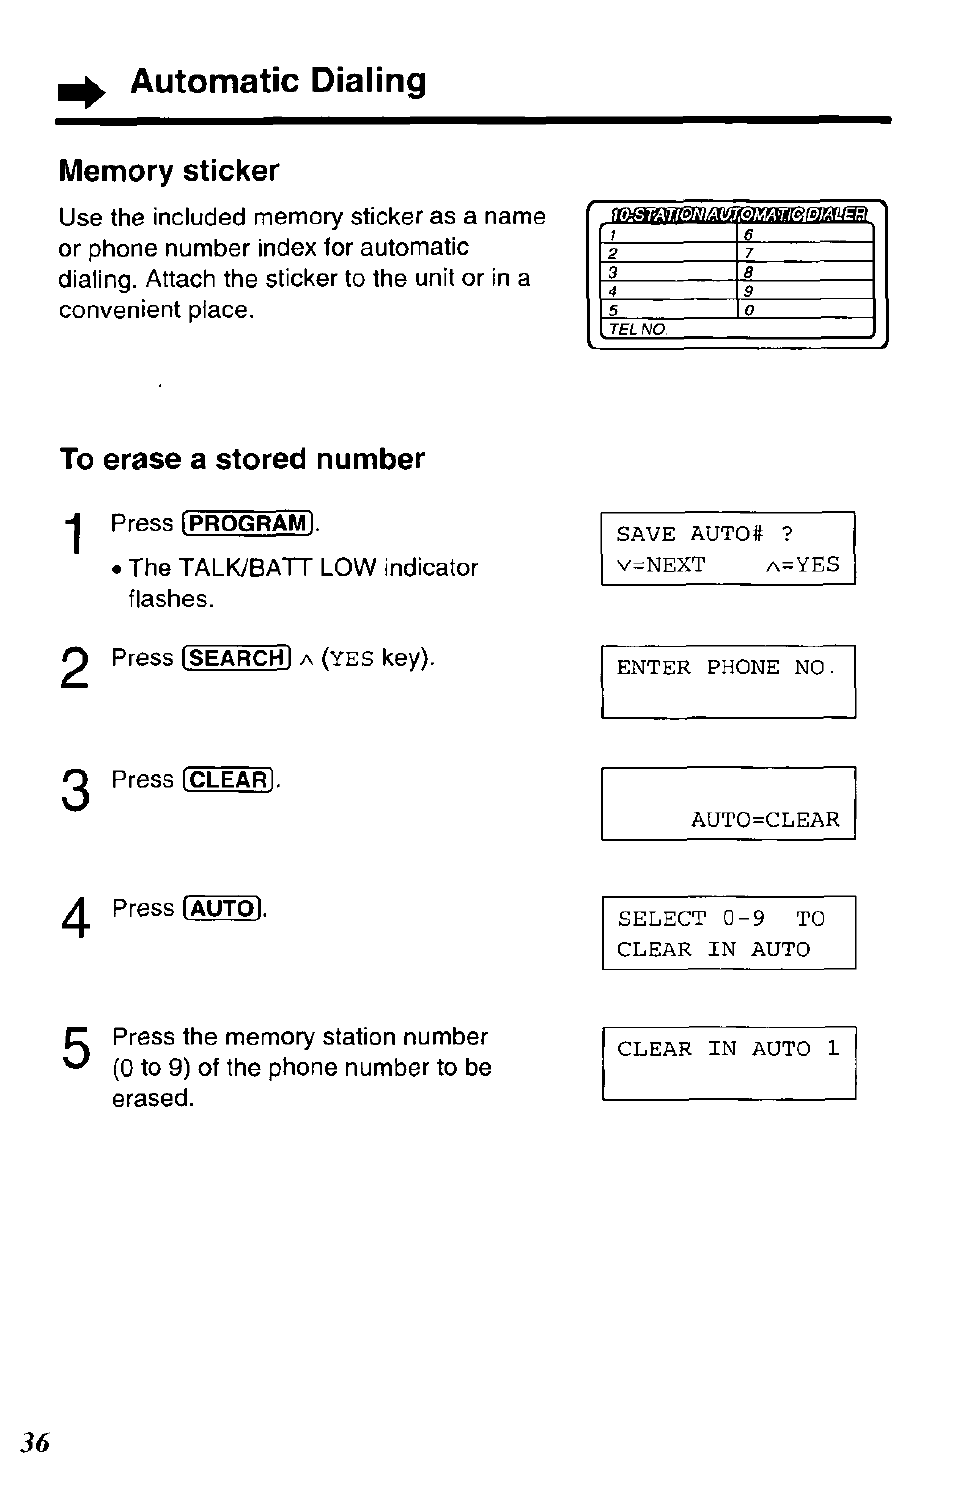 Automatic dialing, Memory sticker, To erase a stored number | Panasonic KC-TCC942-B Manuel d'utilisation | Page 36 / 80